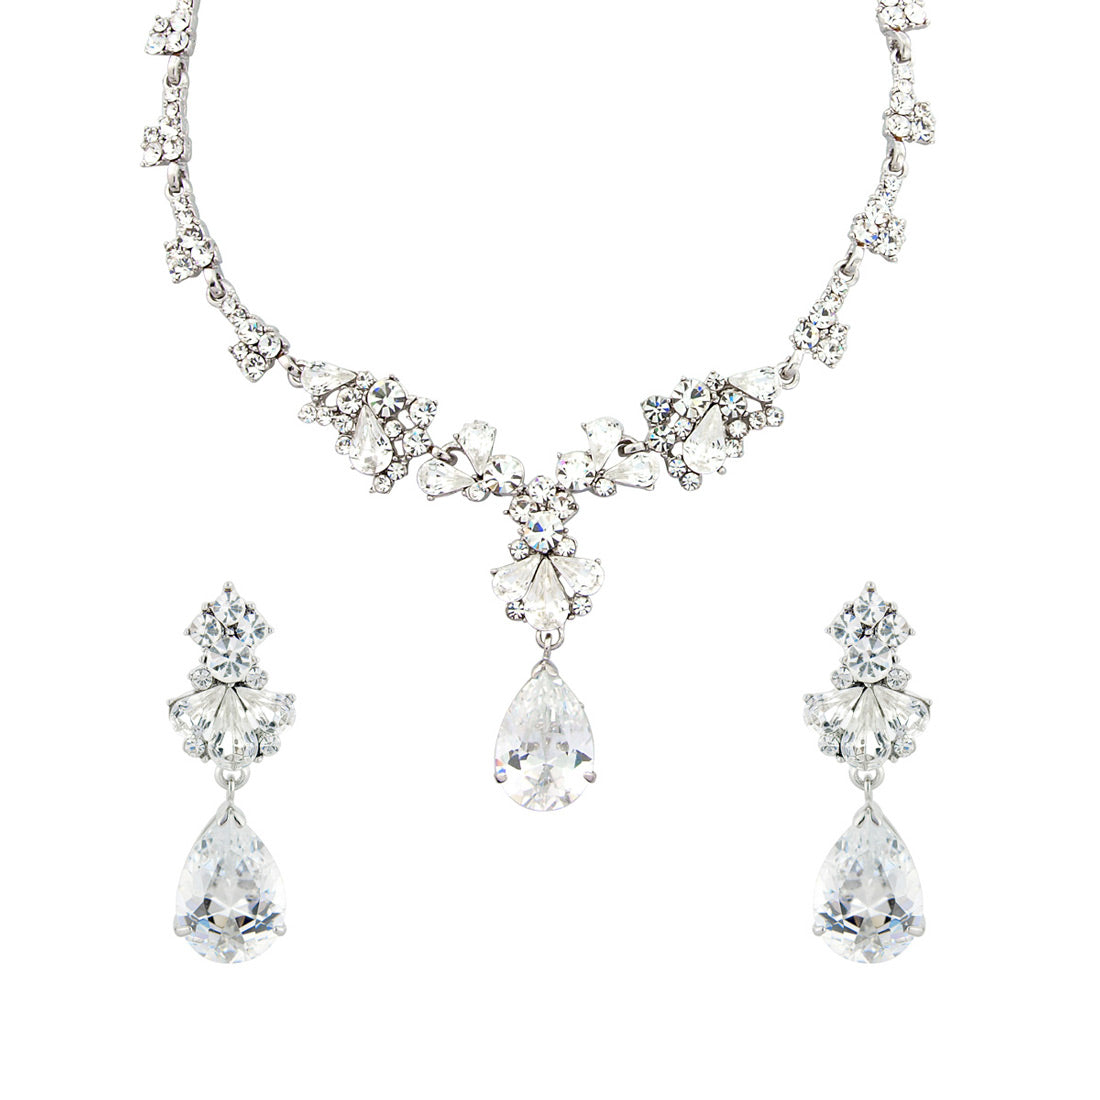 Precious Heiress Cubic Zirconia Jewellery Set featuring drop earrings and necklace